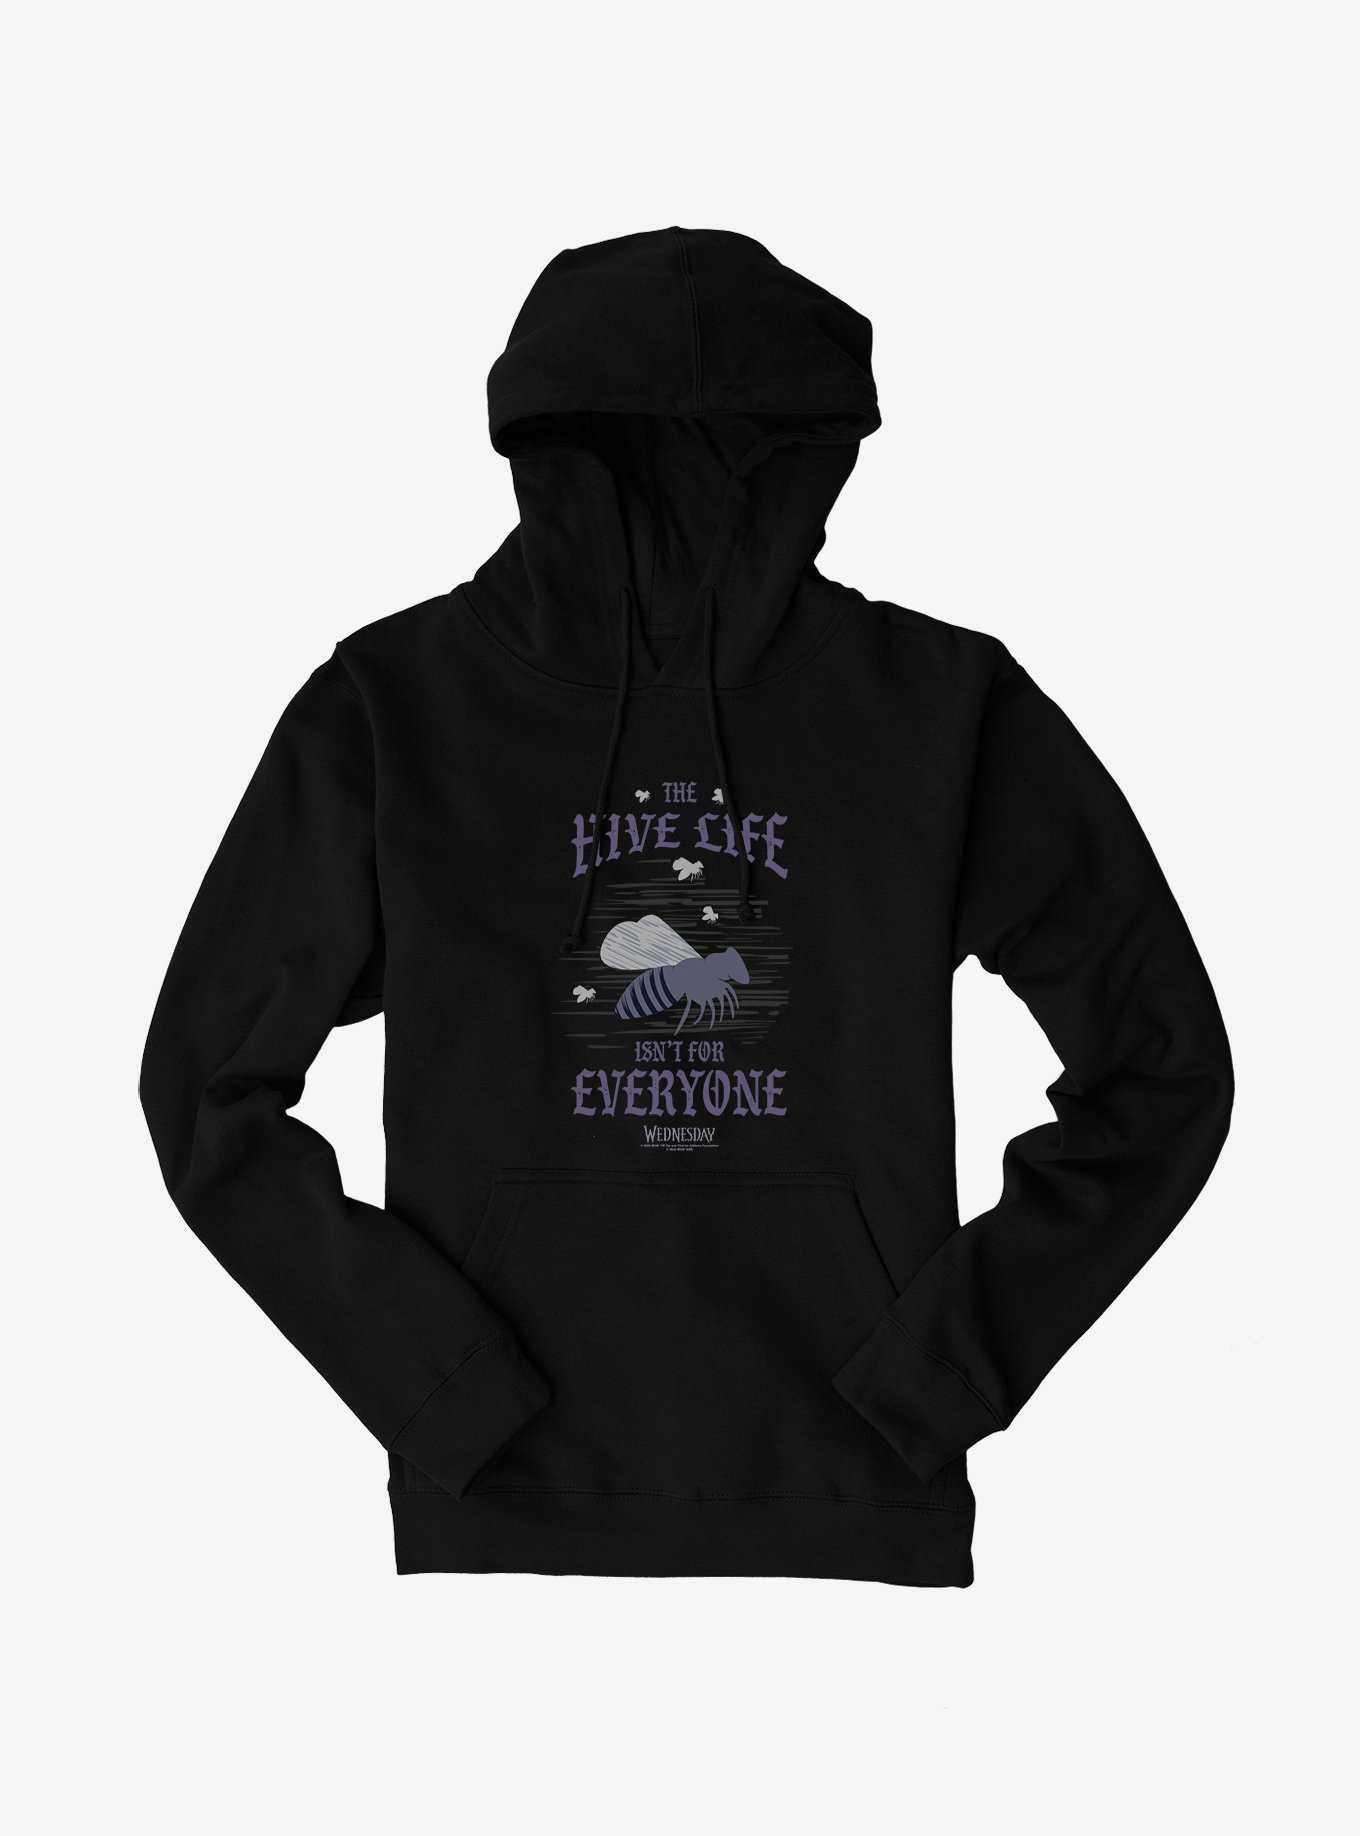 Wednesday The Hive Life Isn't For Everyone Hoodie, , hi-res